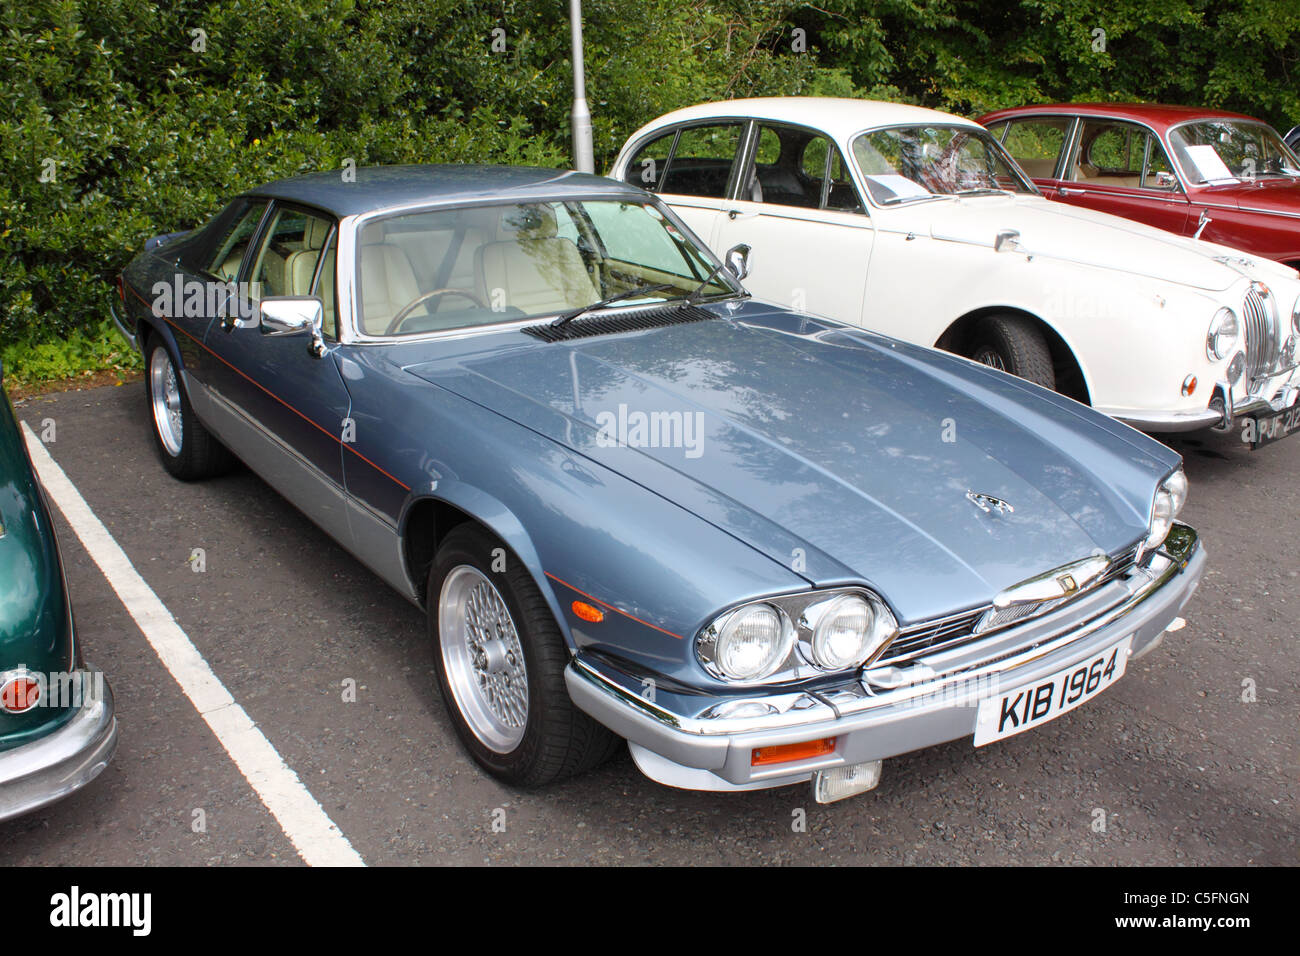 Jaguar XJ-S among a display of classic Jaguars at a car show in Cultra, Northern Ireland Stock Photo